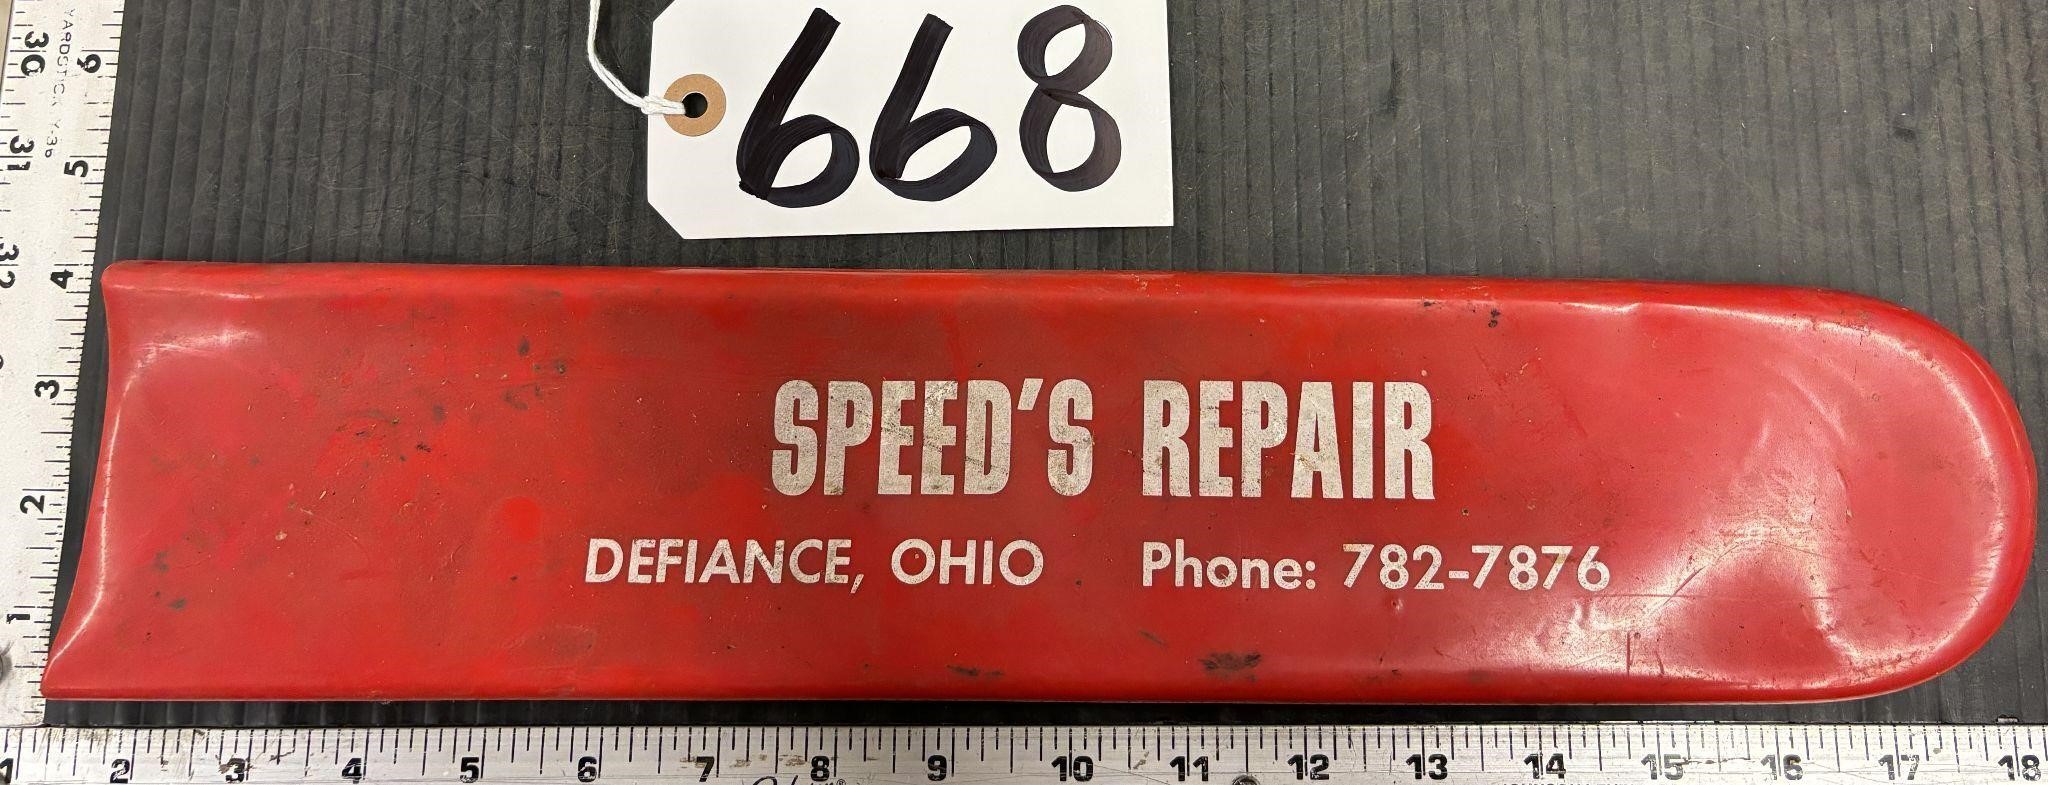 Speed's Repair Advertising Chainsaw Blade Cover